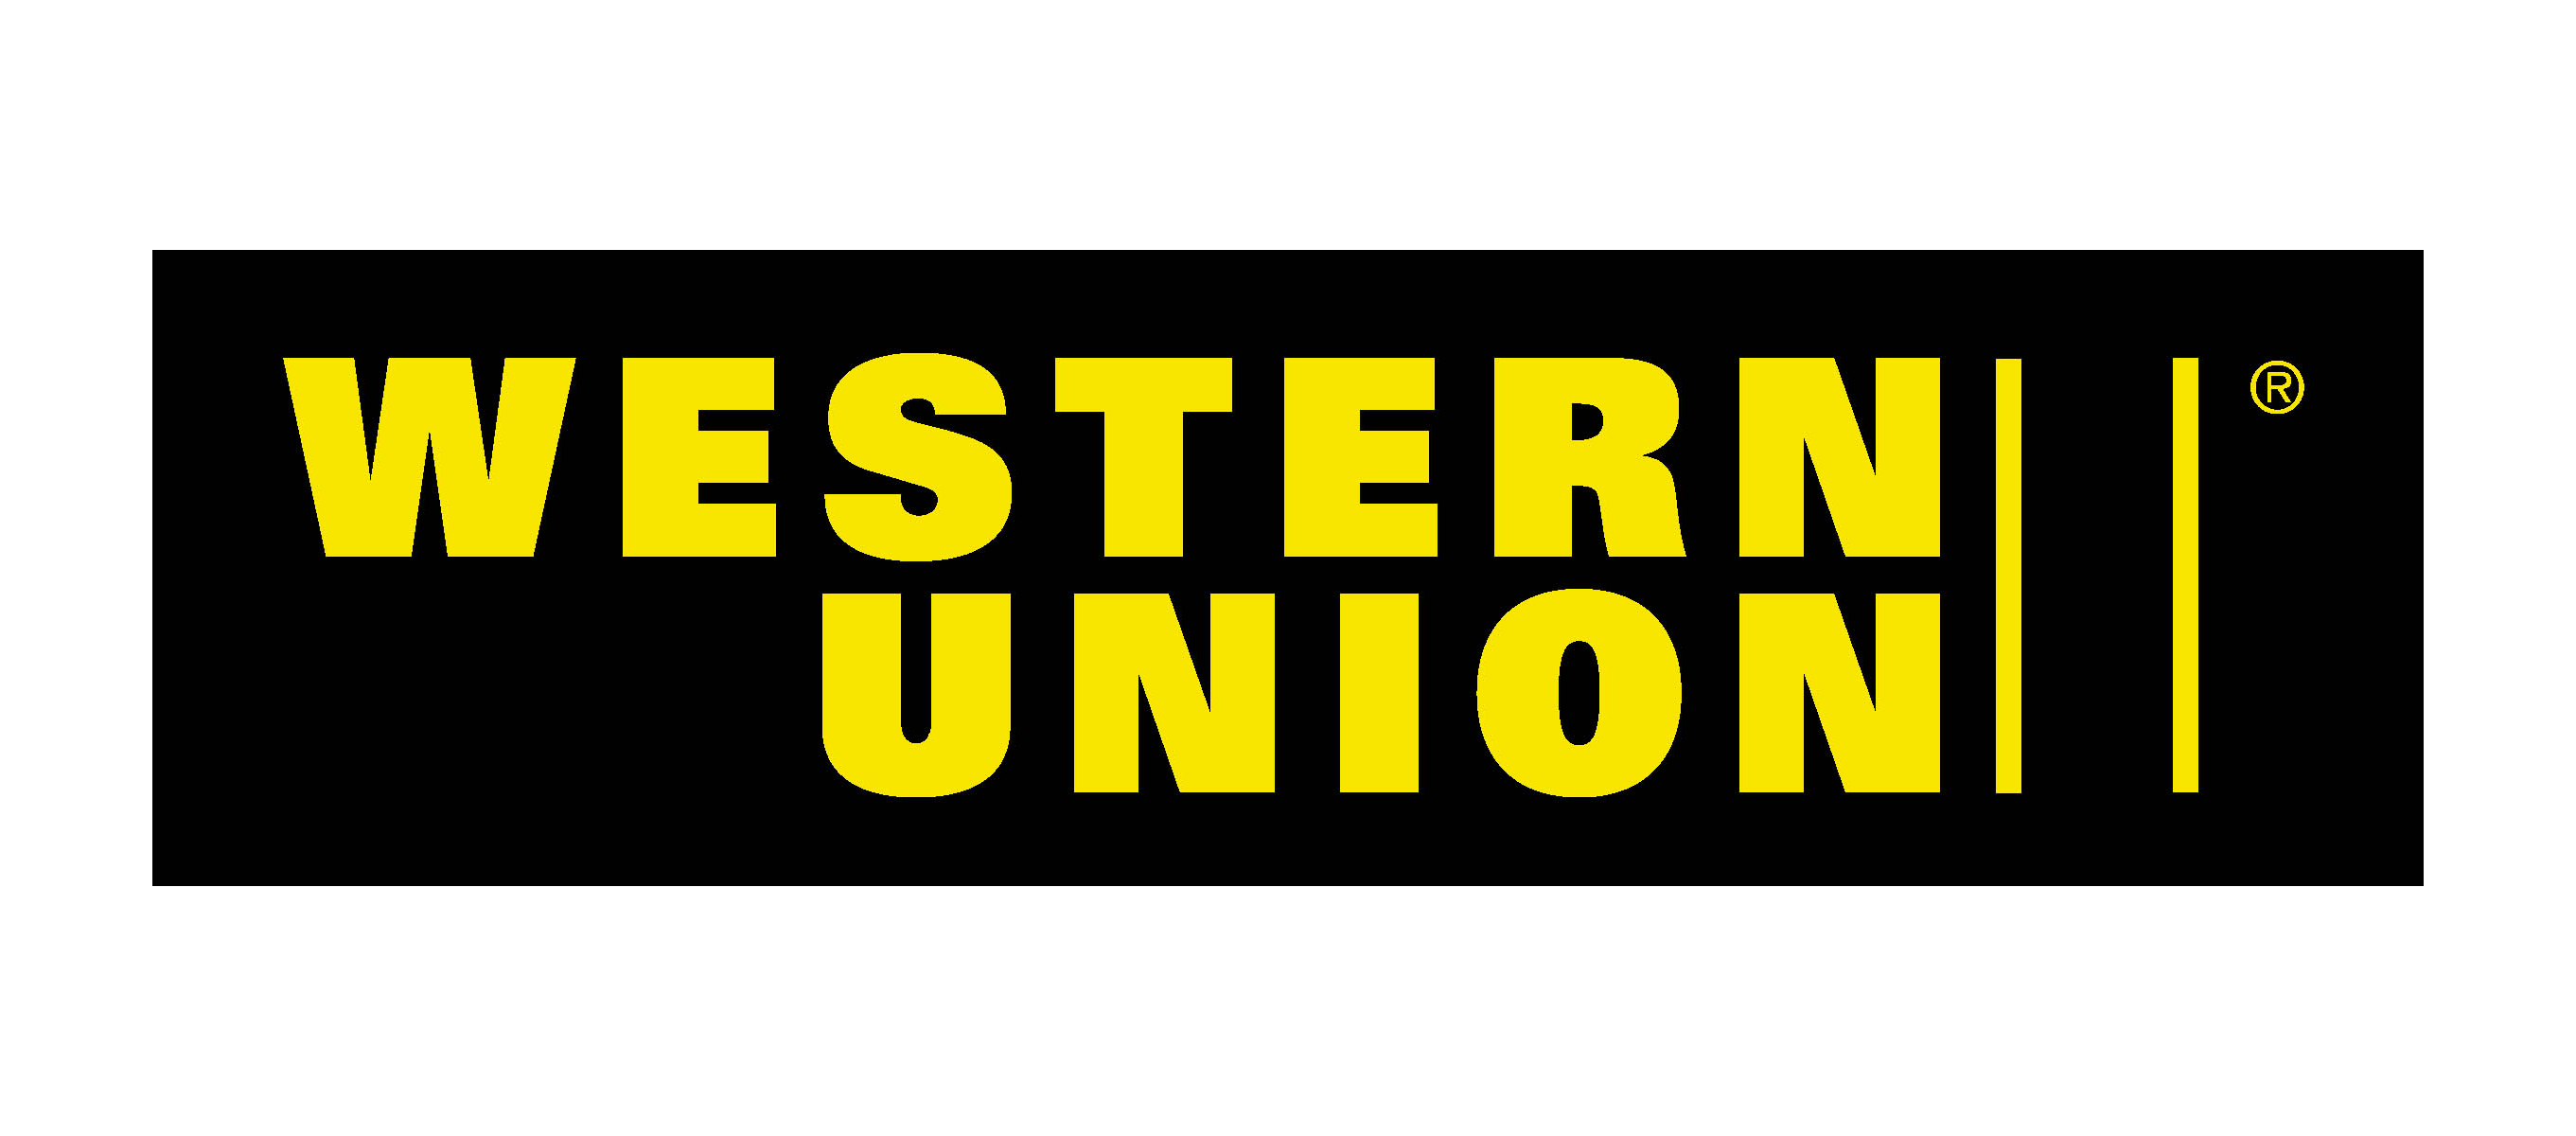 Western Union Expands its Digital Wallet to Latin America